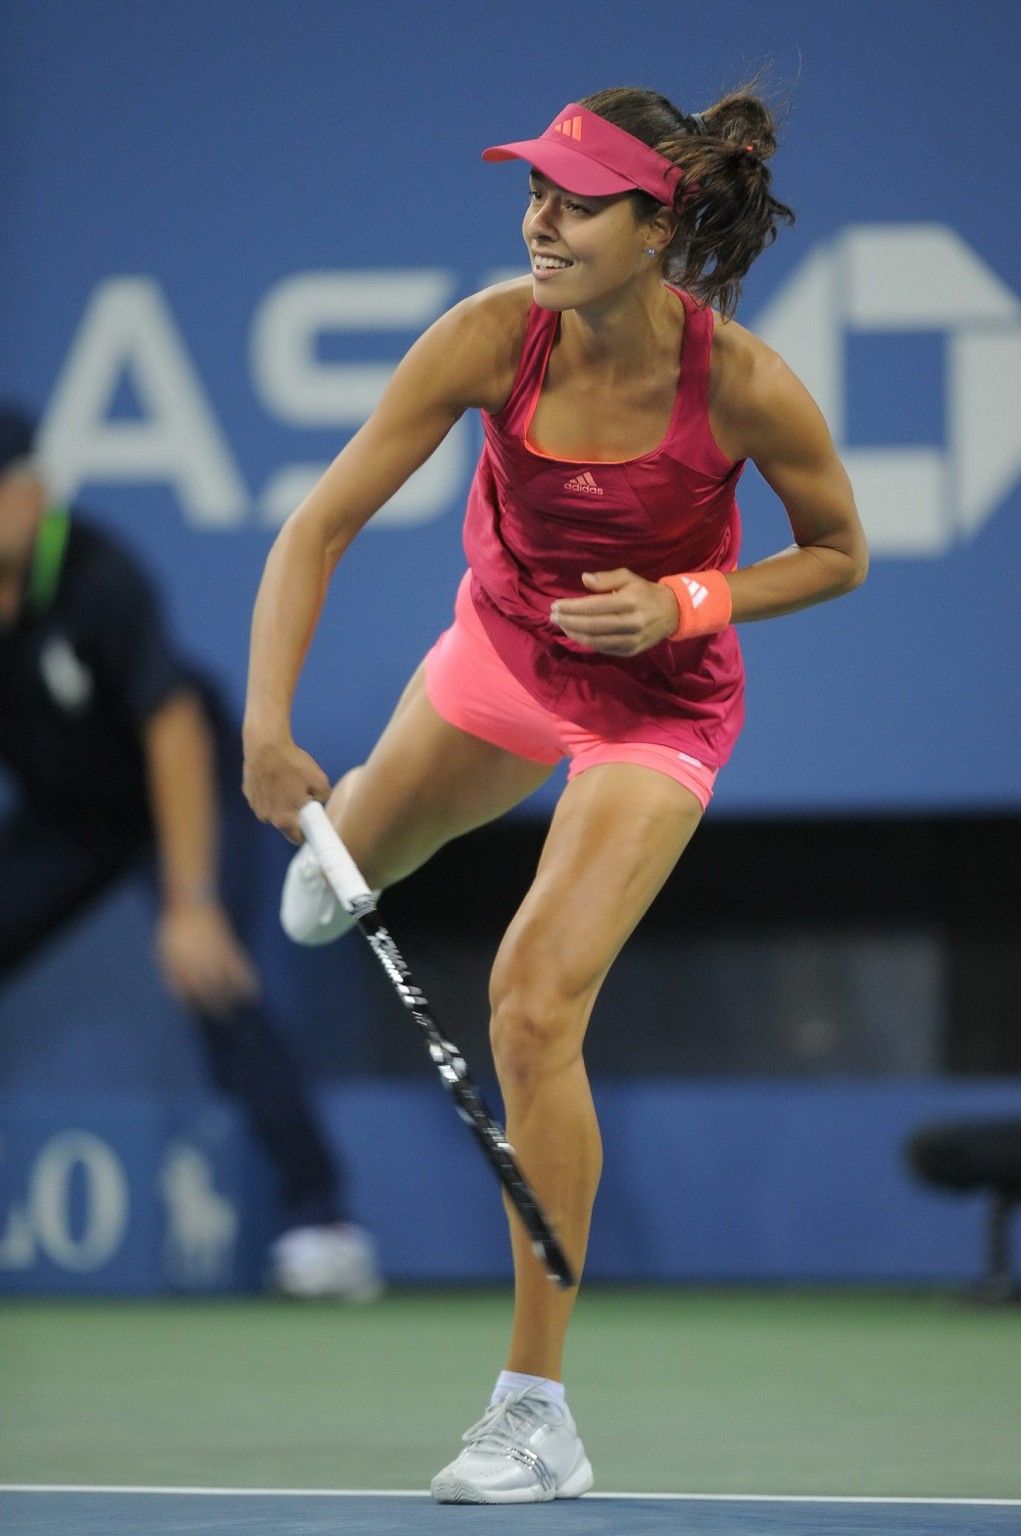 Ana Ivanovic showing cameltoe at the US Open in New York #75289035